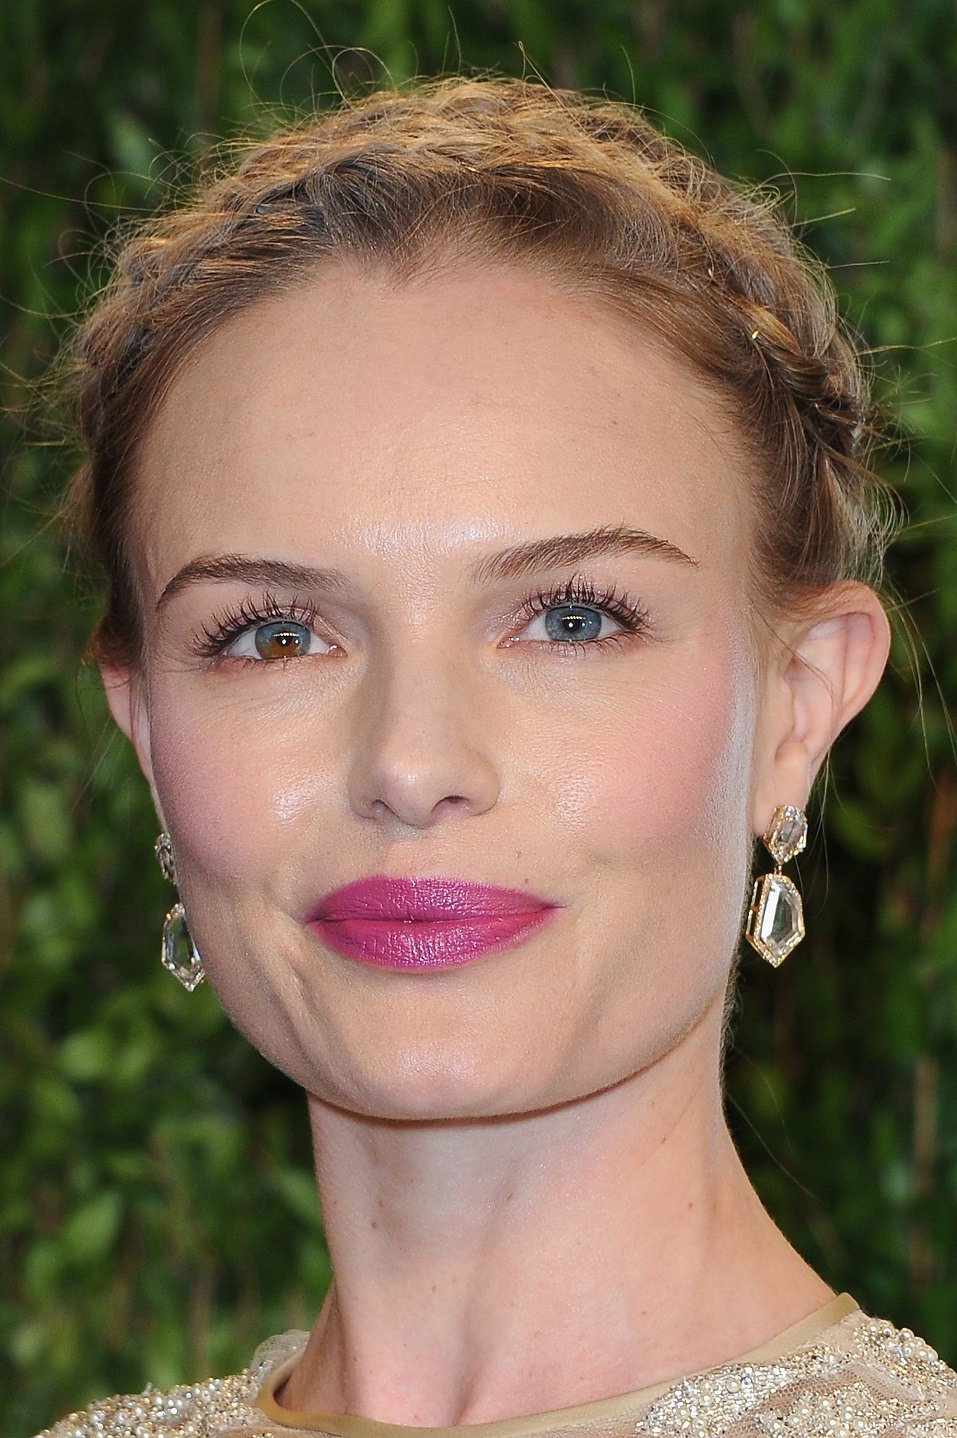 Actress Kate Bosworth arrives at the 2013 Vanity Fair Oscar Party hosted by Graydon Carter